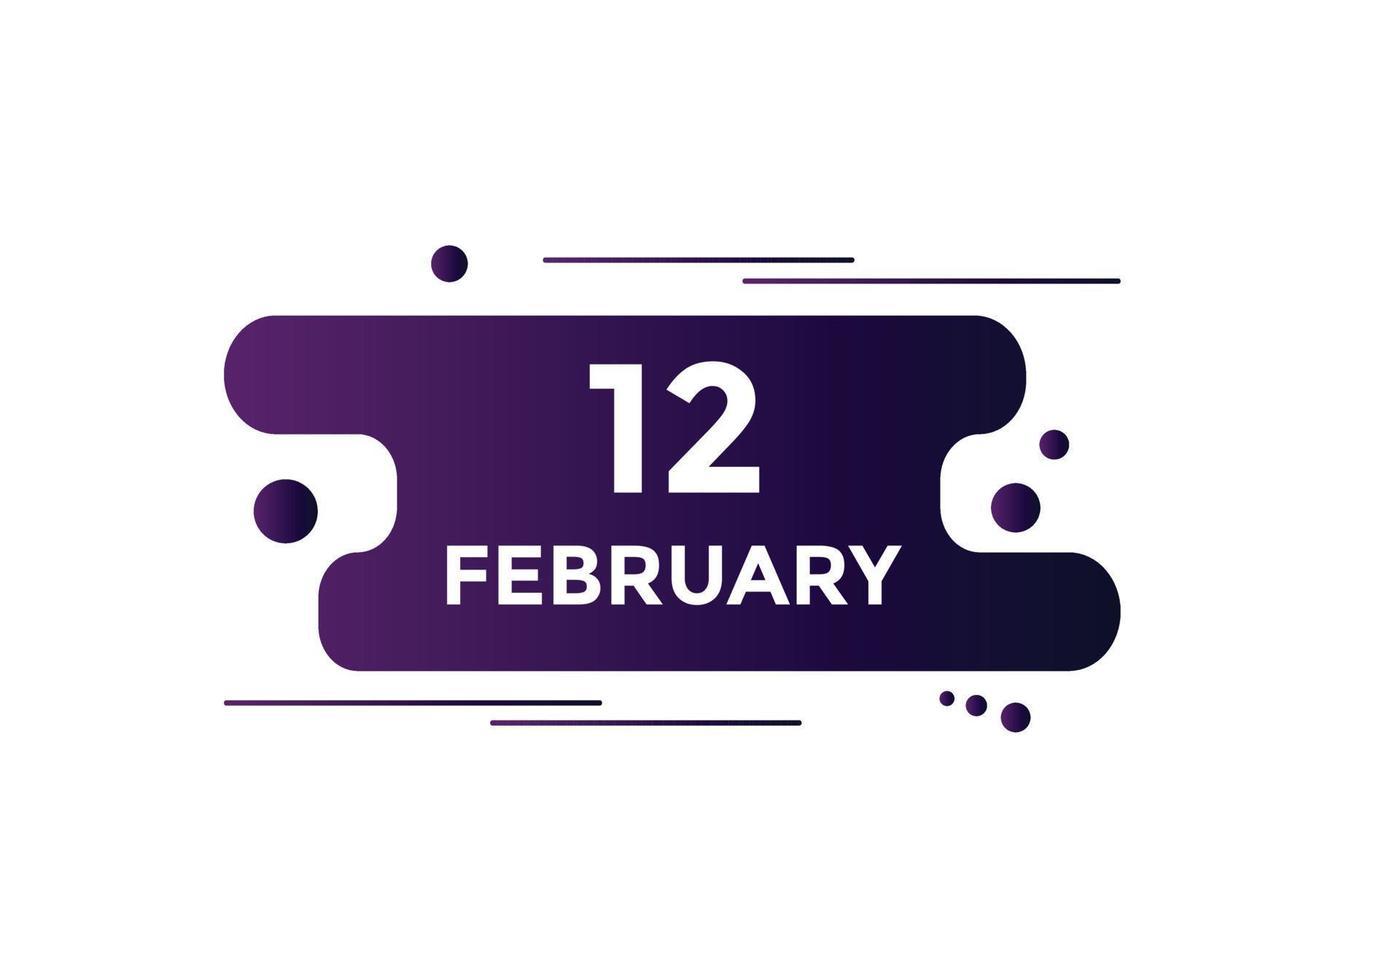 february 12 calendar reminder. 12th february daily calendar icon template. Calendar 12th february icon Design template. Vector illustration